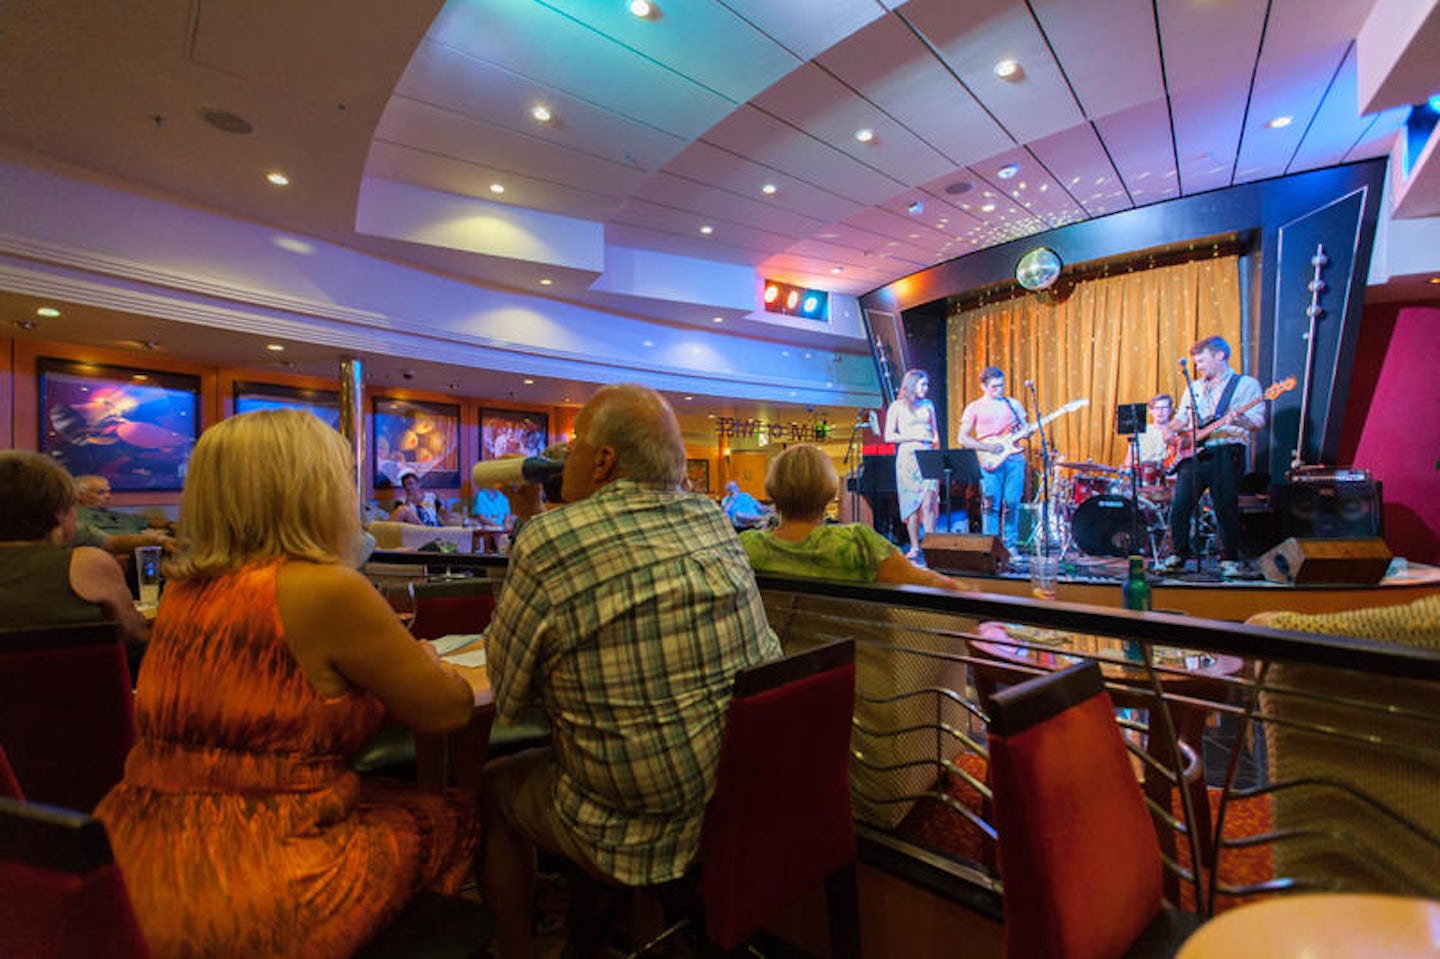 Your Favorites Beatles HIts with Undercover on Independence of the Seas